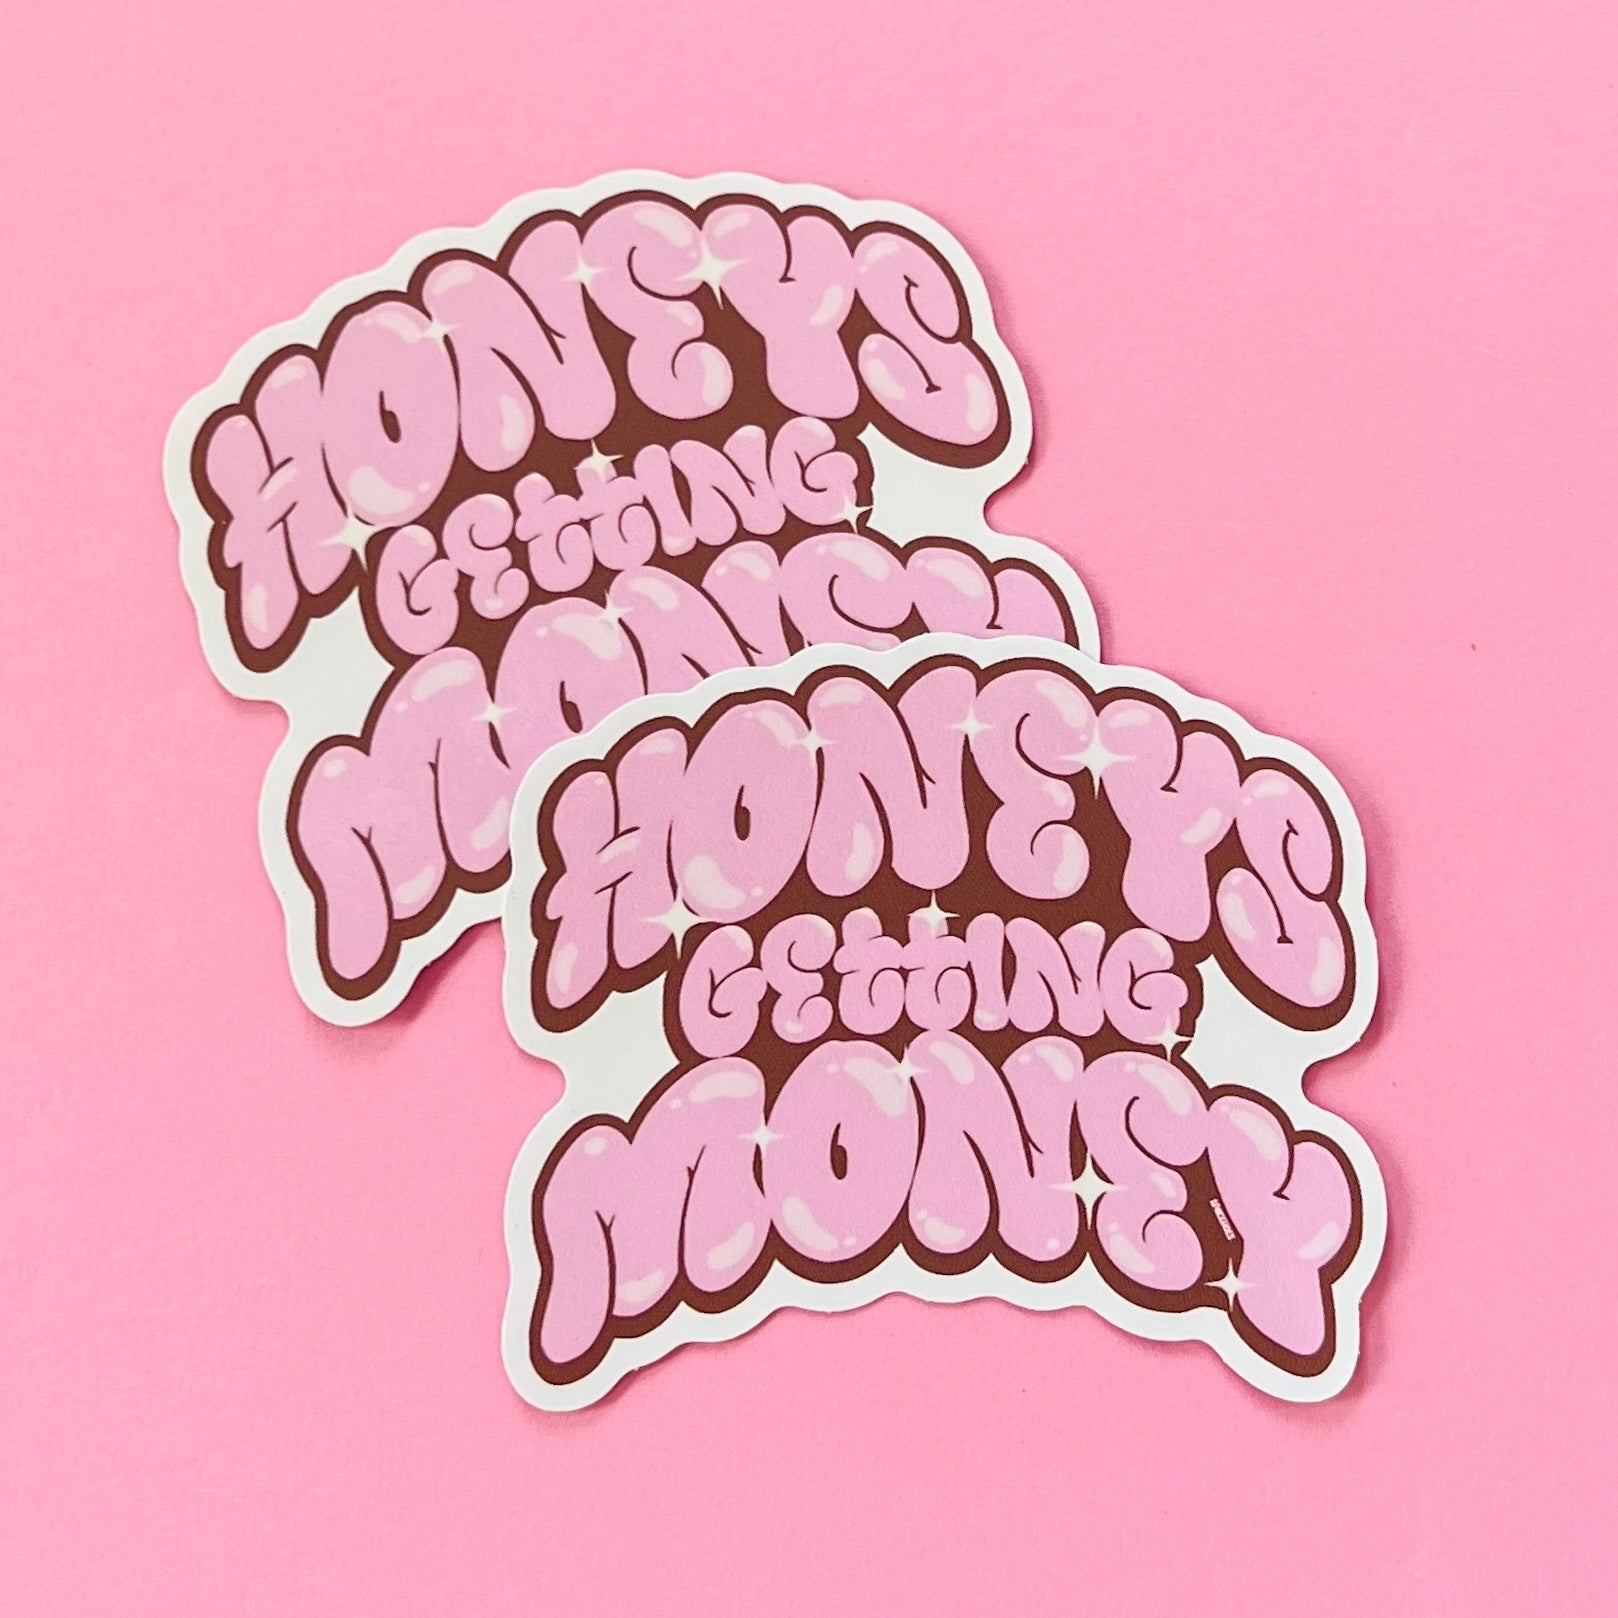 I MAKE MONEY MOVES Sticker for Sale by Black Herb Stickers